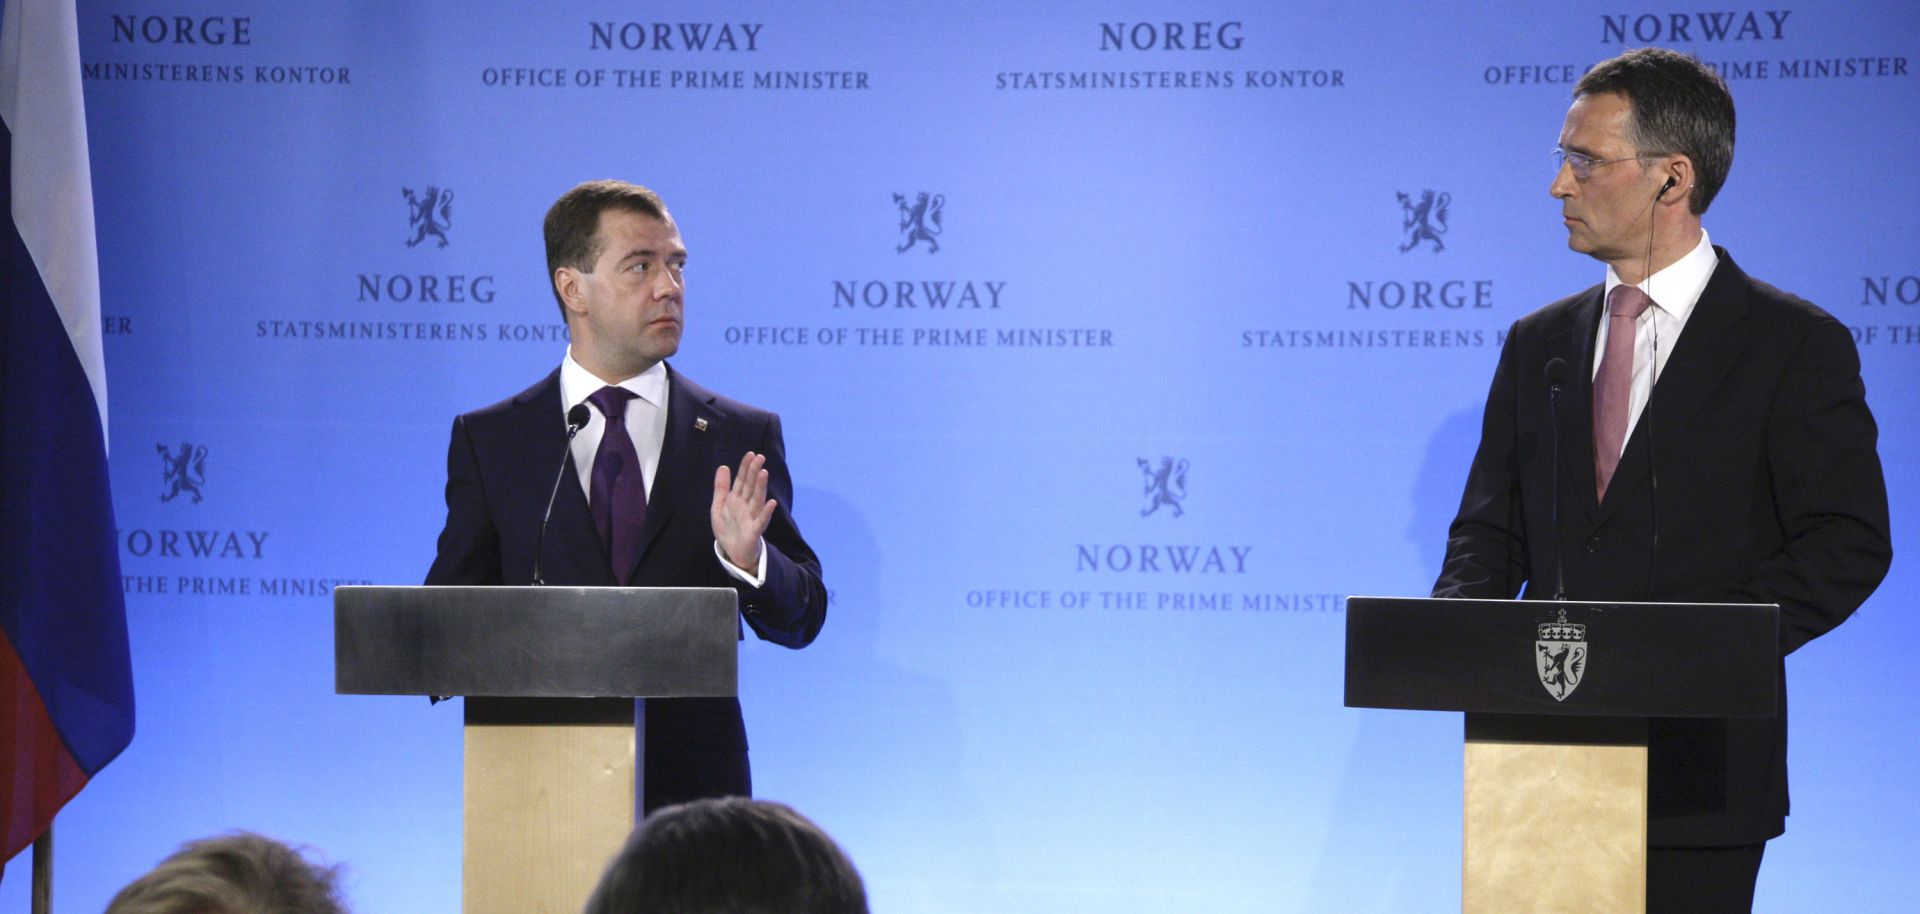 Russian President Dmitry Medvedev gestures while speaking during a press conference with Norwegian Prime Minister Jens Stoltenberg in Oslo.